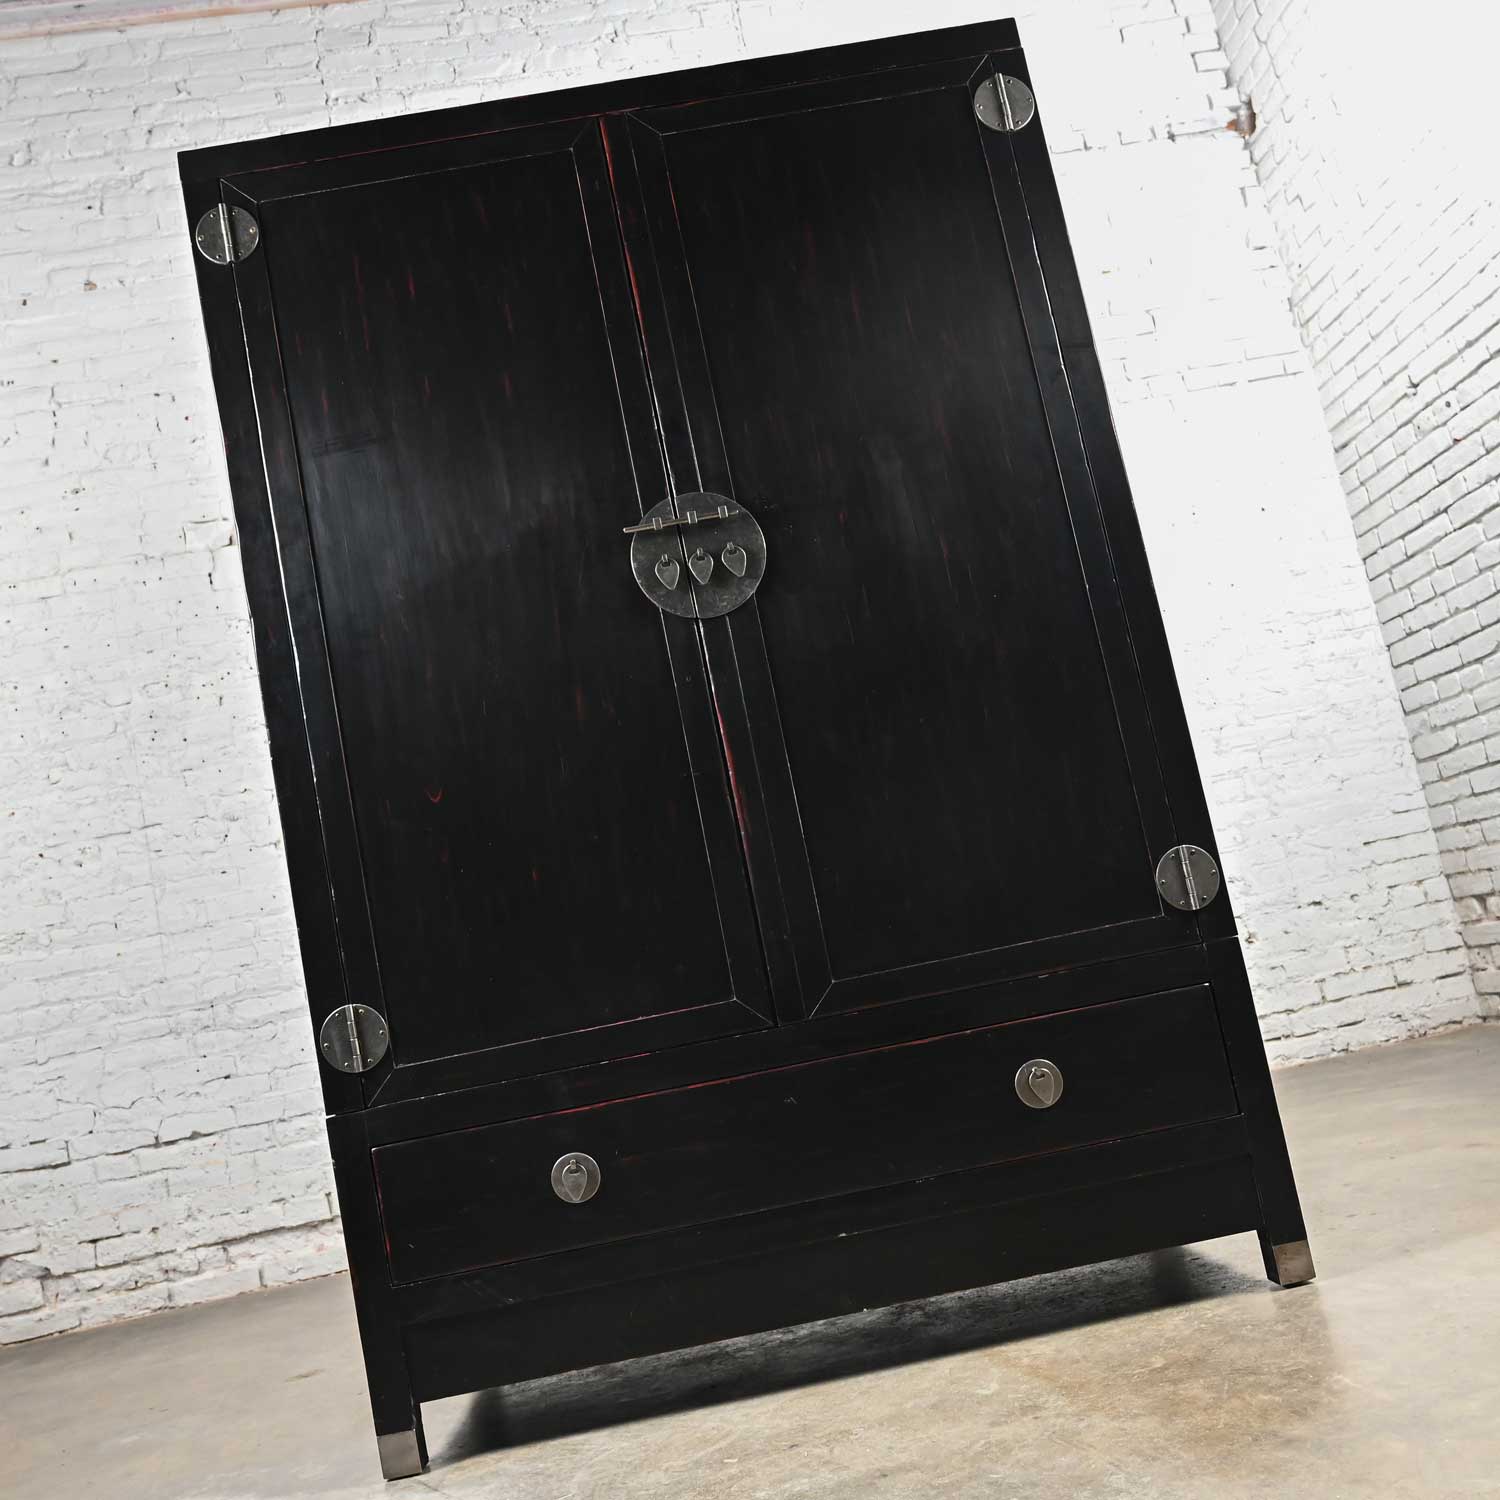 Late 20th Century Chinoiserie or Asian Style Baker Milling Road Entertainment Storage Cabinet